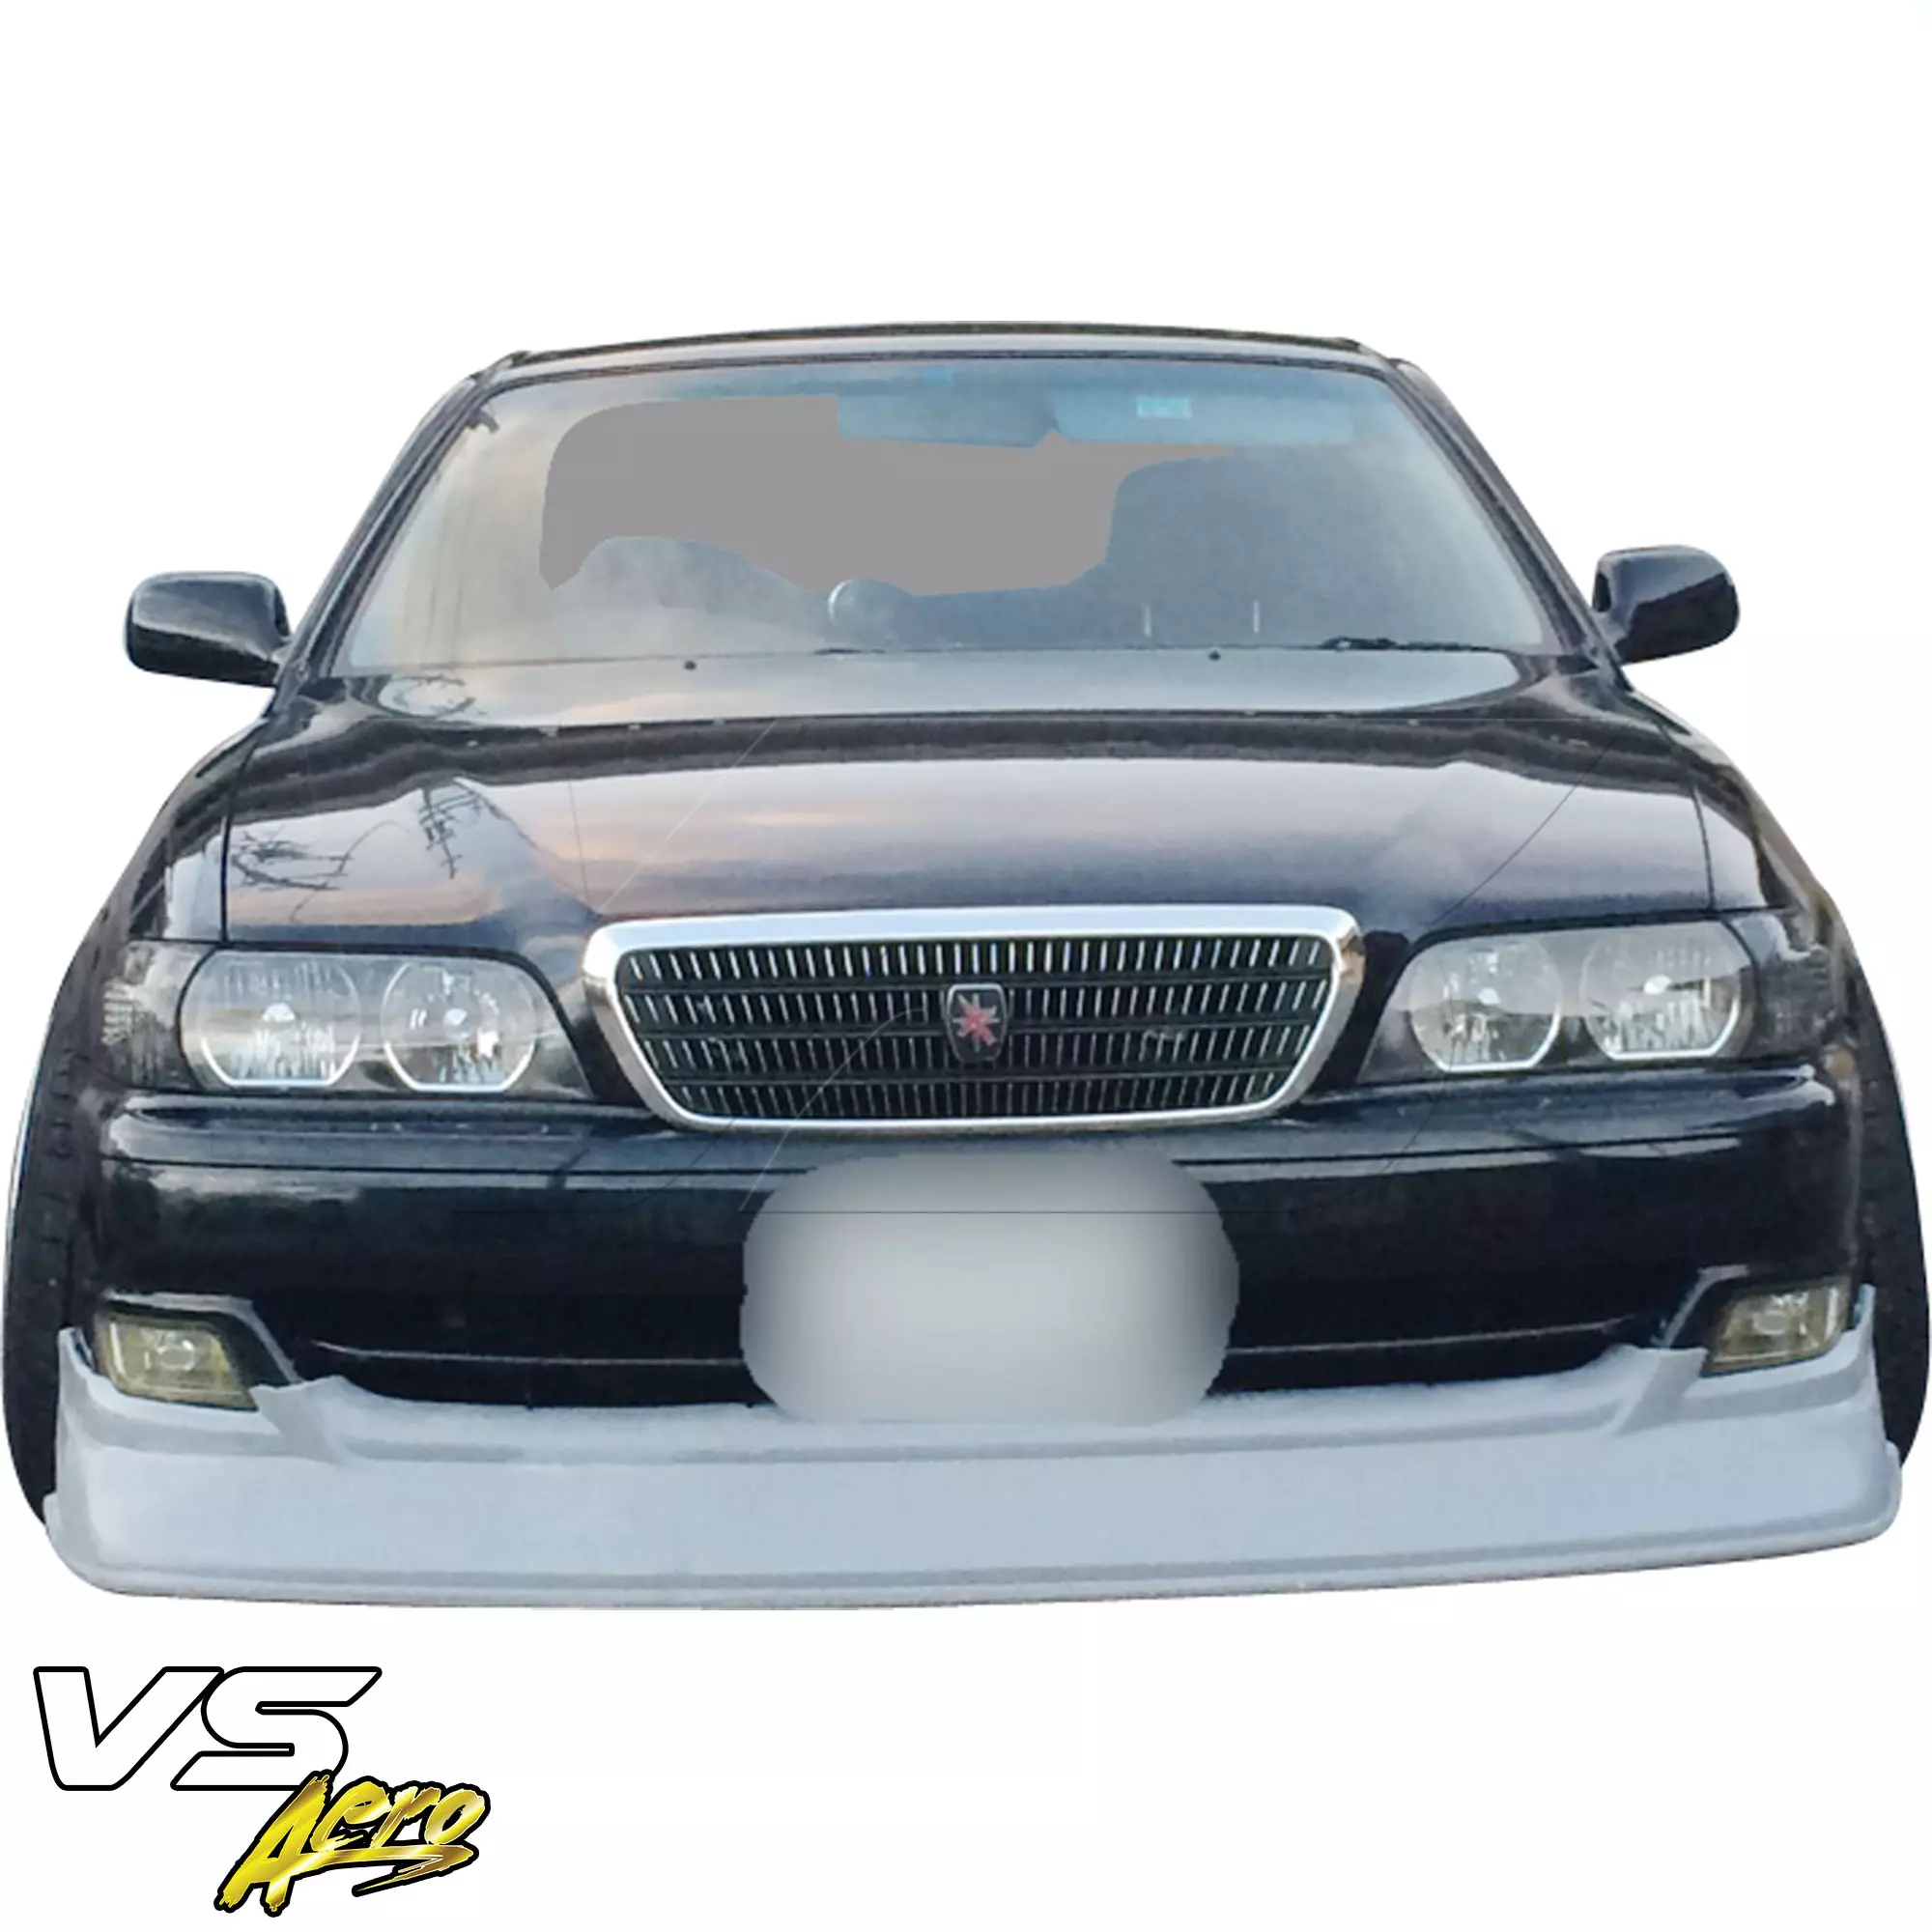 VSaero FRP TRAU Late Front Lip Valance > Toyota Chaser JZX100 1999-2000 - Image 28